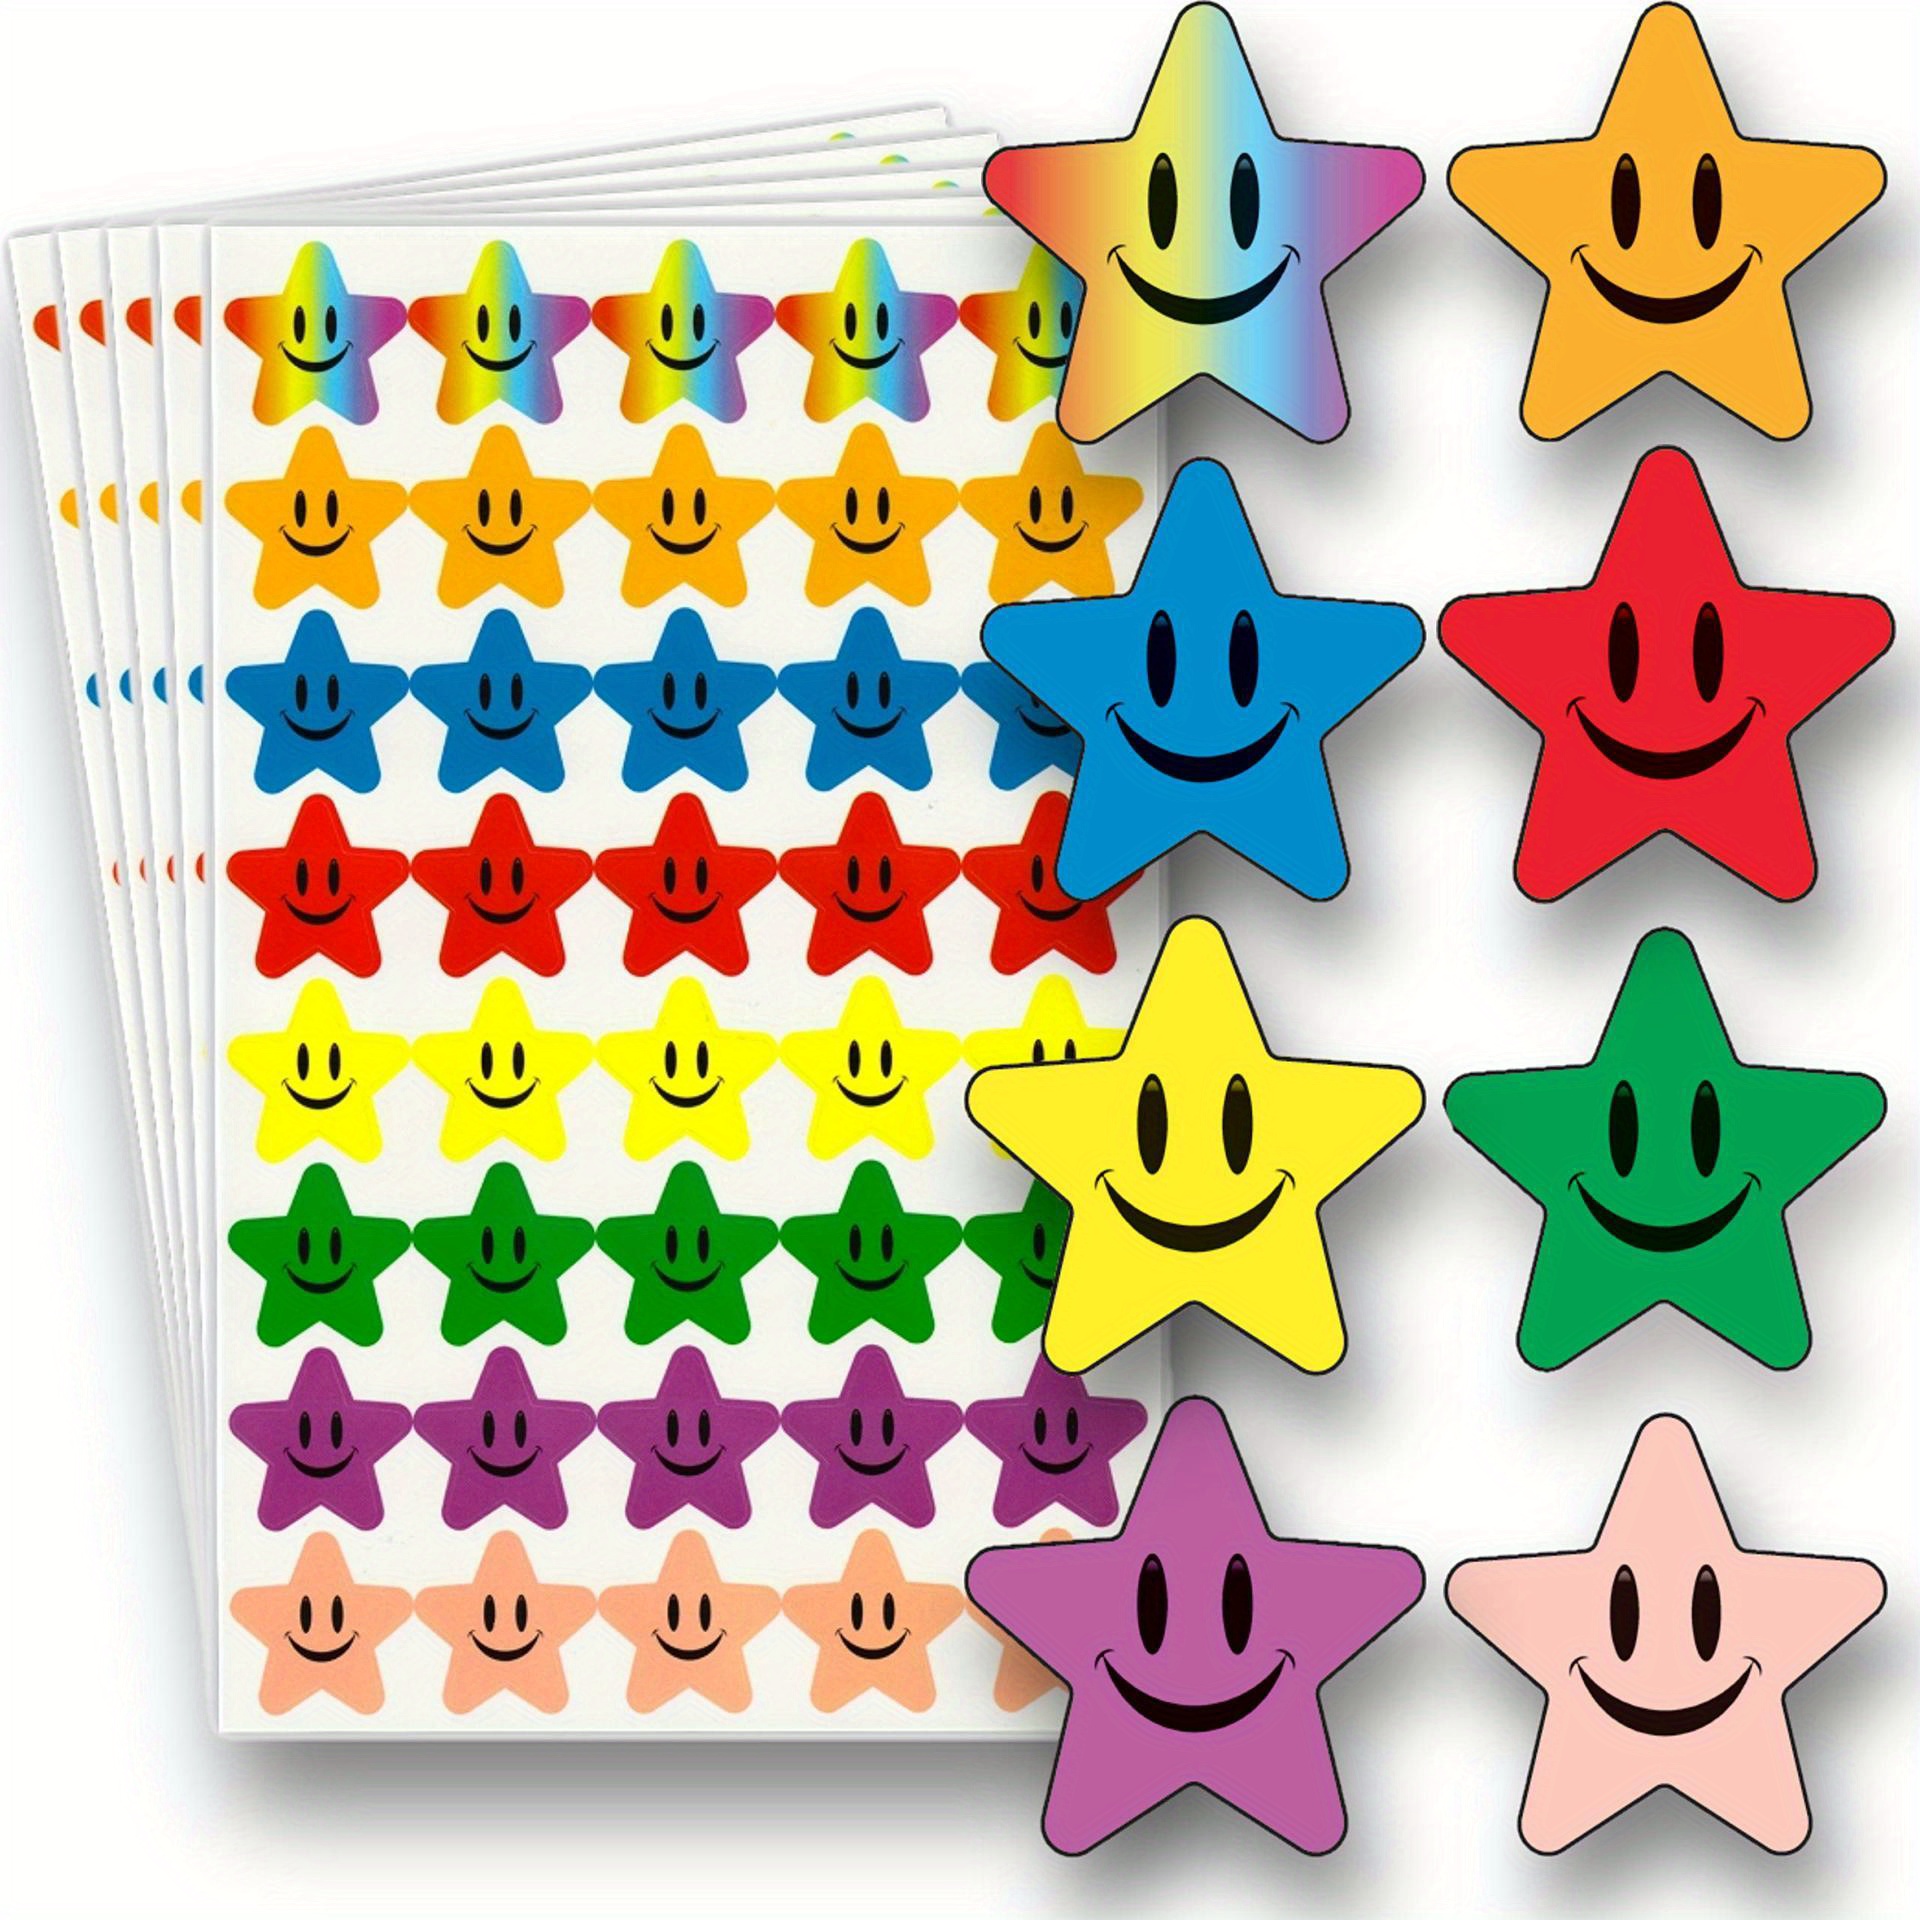  600Pcs Holographic Gold Star Stickers, Sparkly Foil Small Star  Stickers for Kids Reward, Behavior Chart, Student Planner, Classroom  Teacher Supplies(1 Diameter) : Office Products